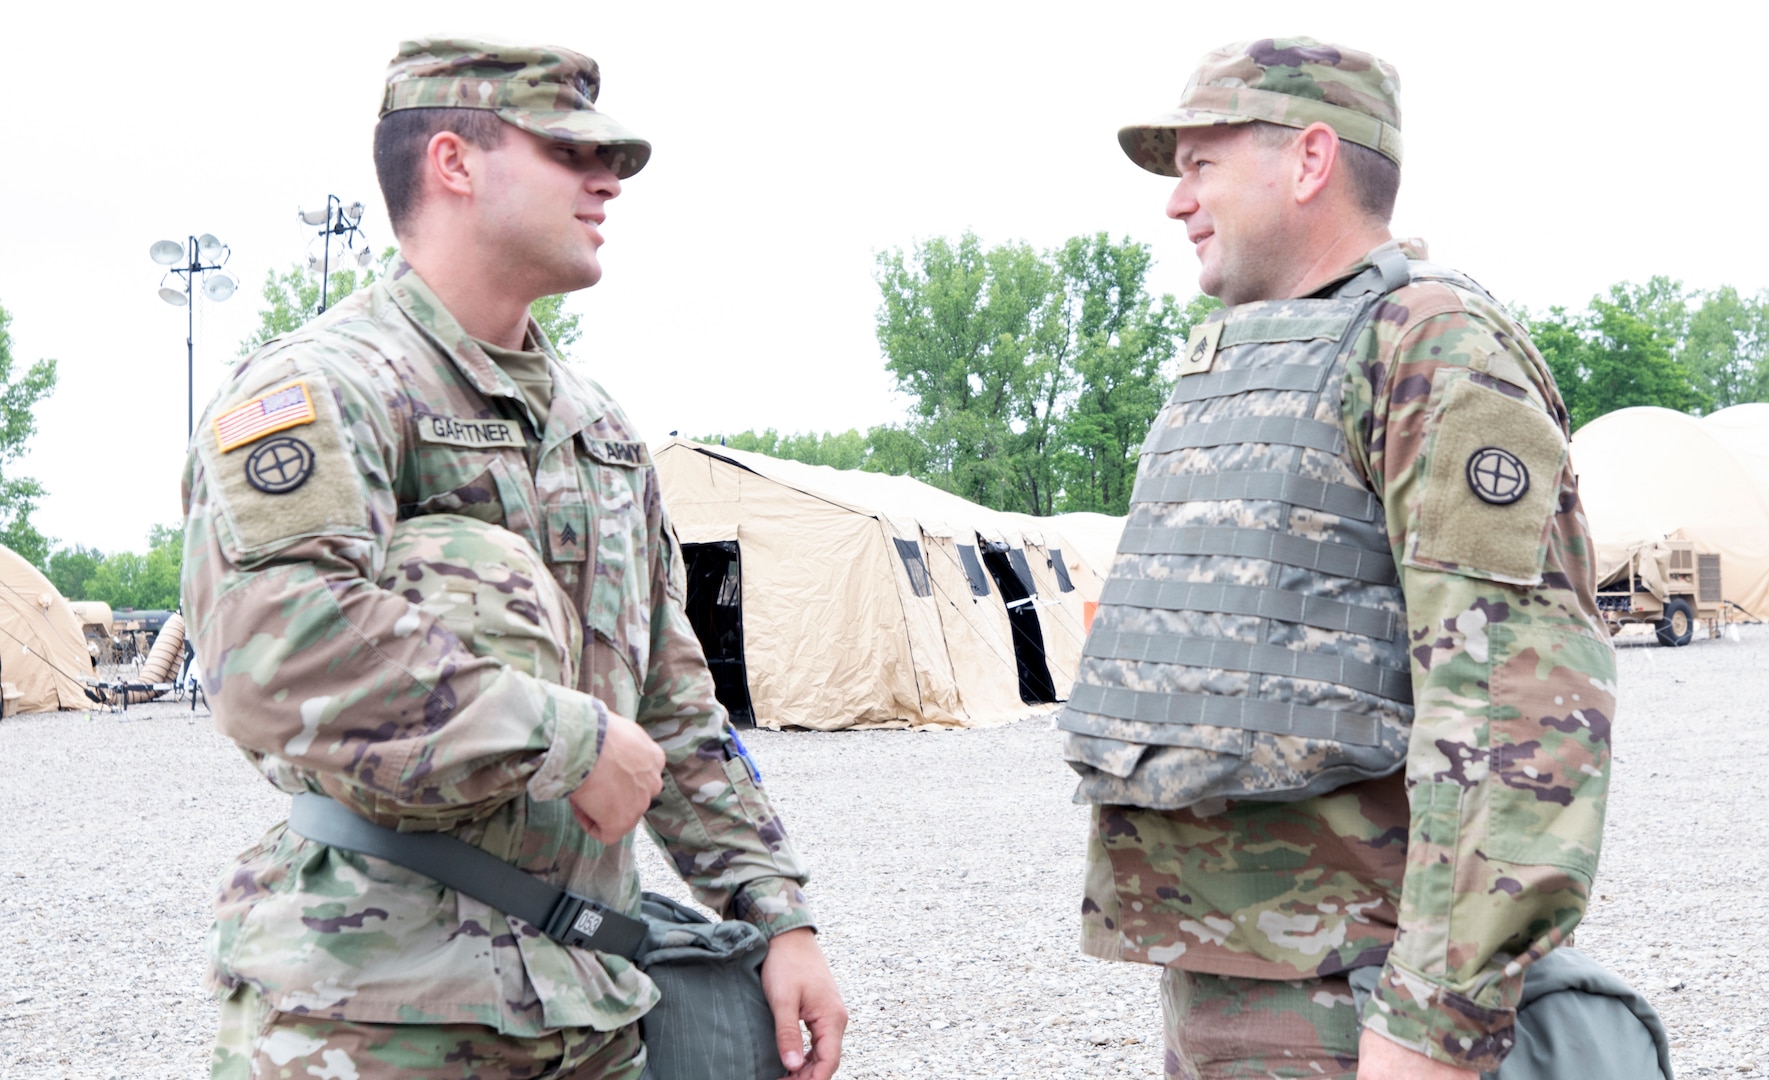 Sgt. Ryan Gartner and Staff Sgt. Brian Foley, both of the 35th Infantry Division, take time to go over their job duties for the day June 9, 2021, during Warfighter 21-05 at Camp Atterbury, Ind.